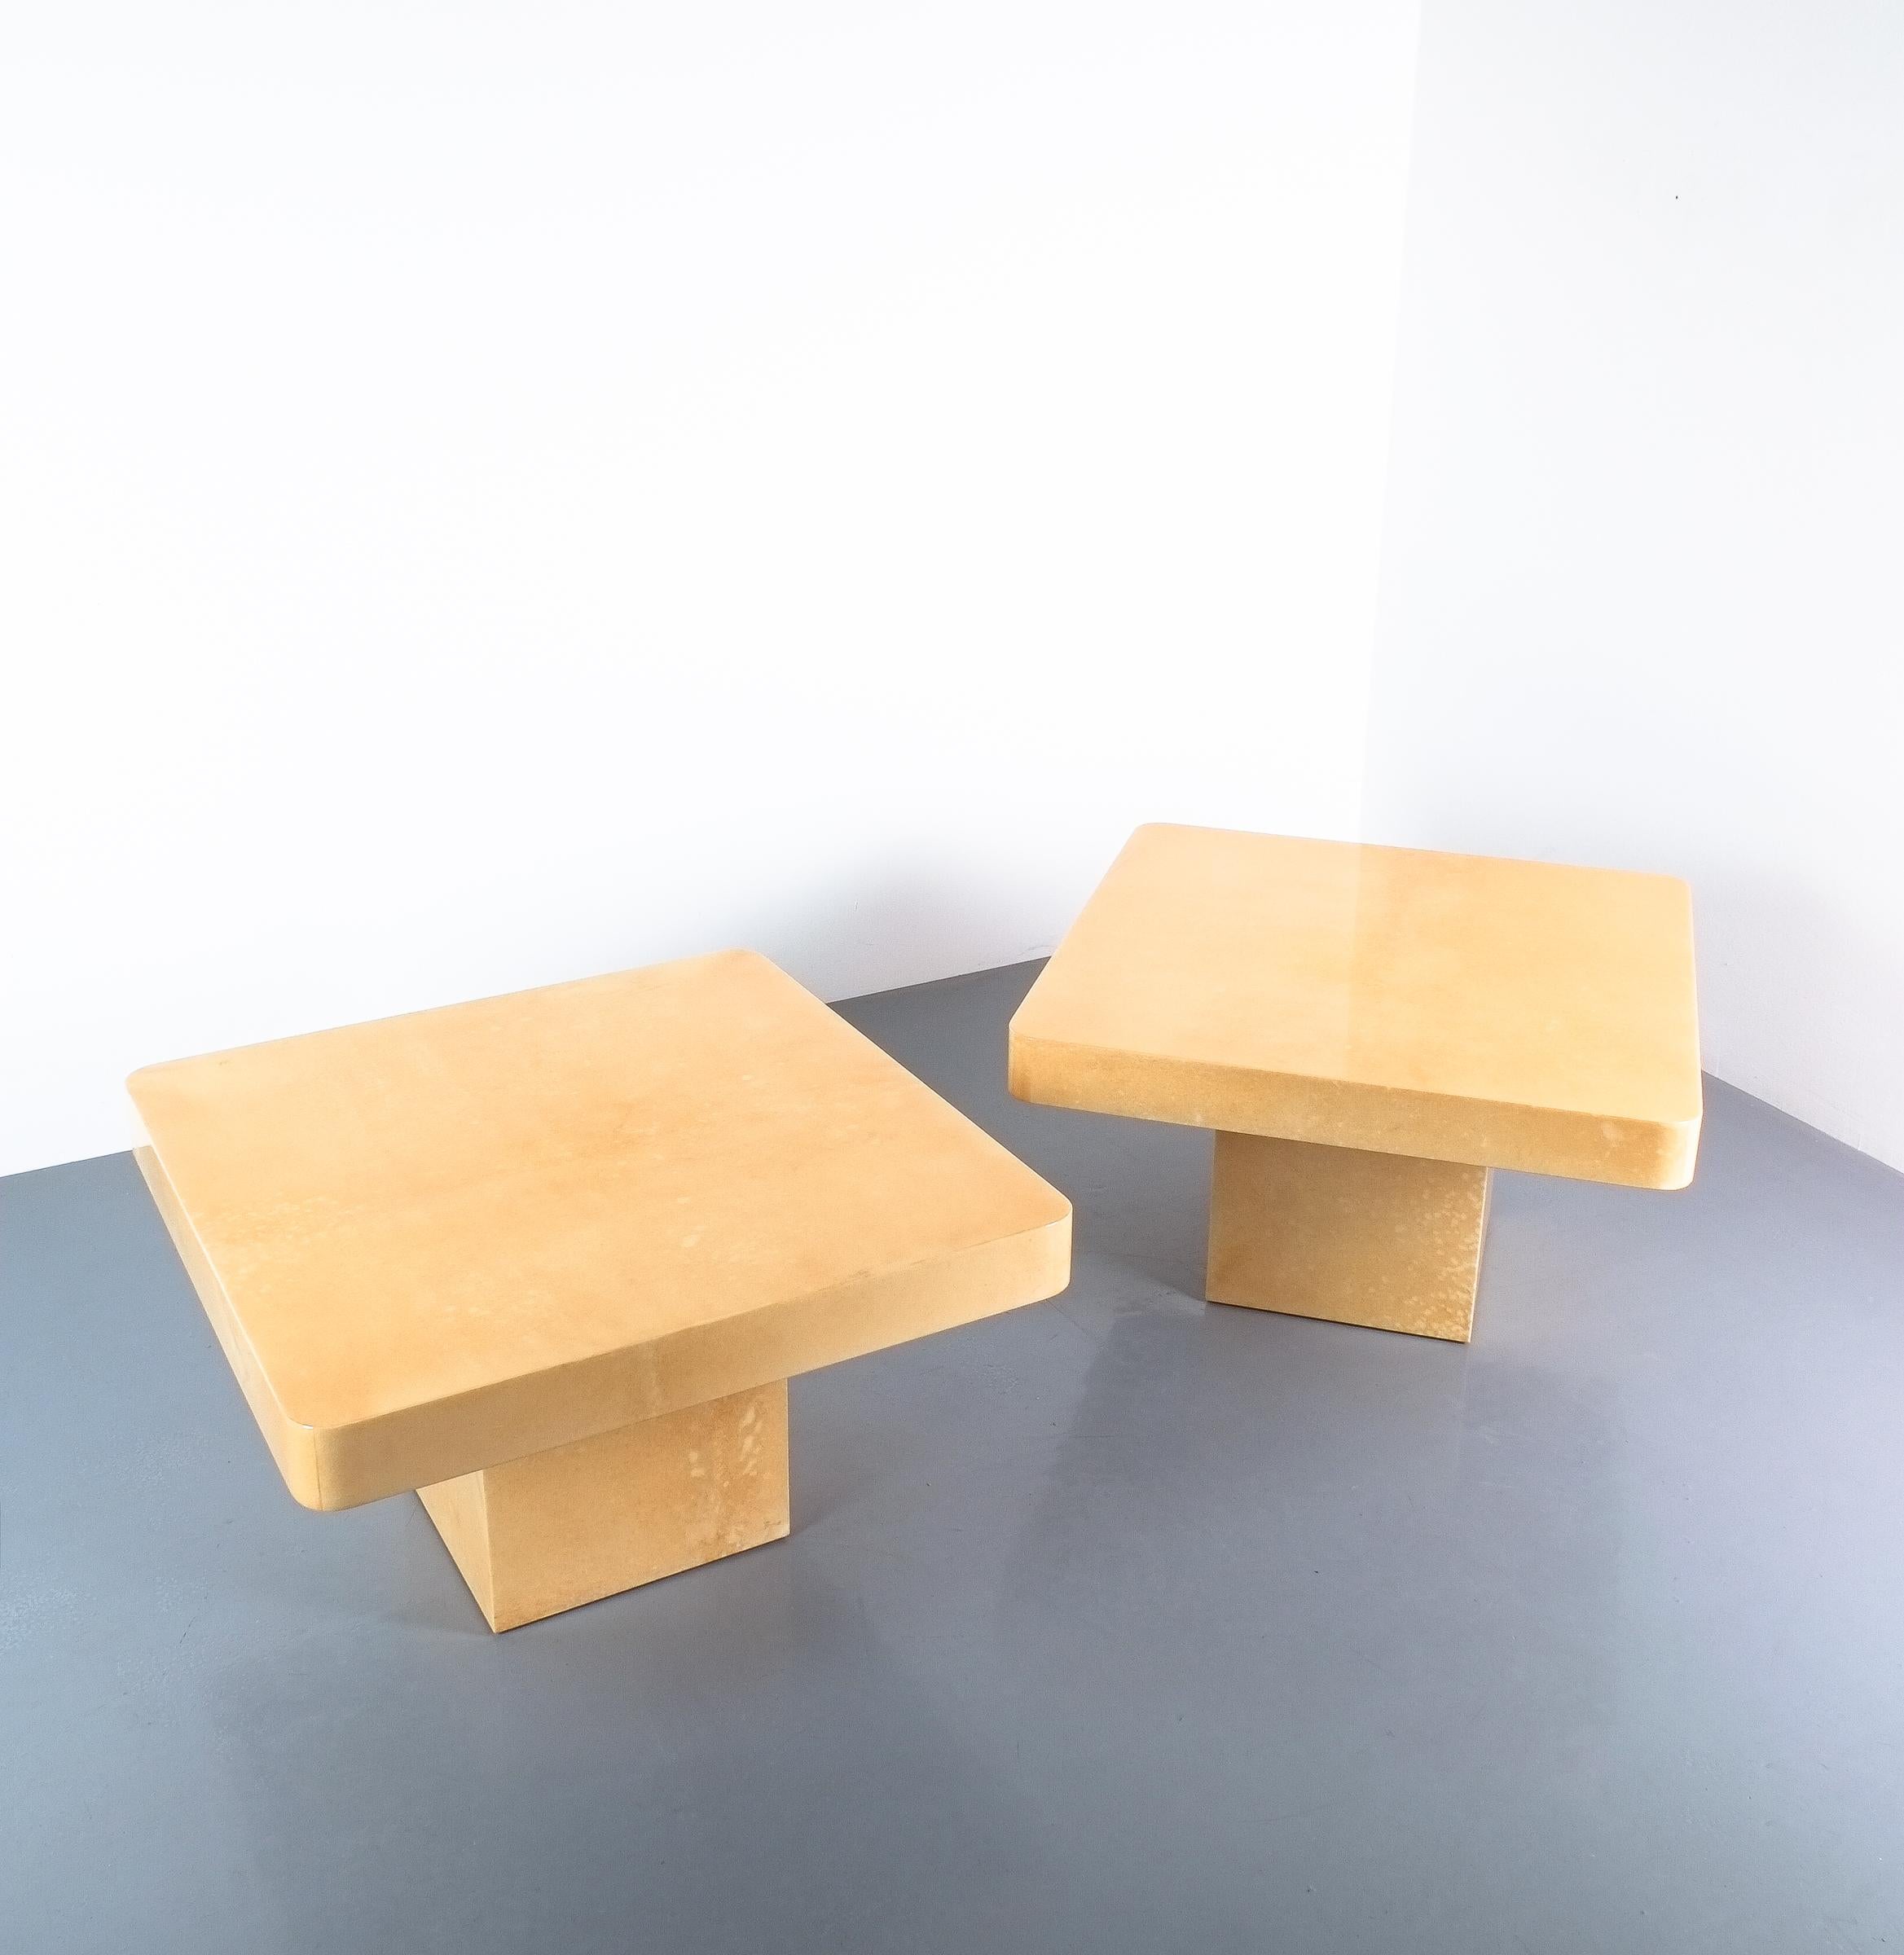 Pair of parchment tables by Aldo Tura Coffee Side, Italy, 1970

Nice pair of tan coffee tables from parchment in immaculate condition, priced as a pair. They can be used as side tables also due to the size (27.8 x 27.8